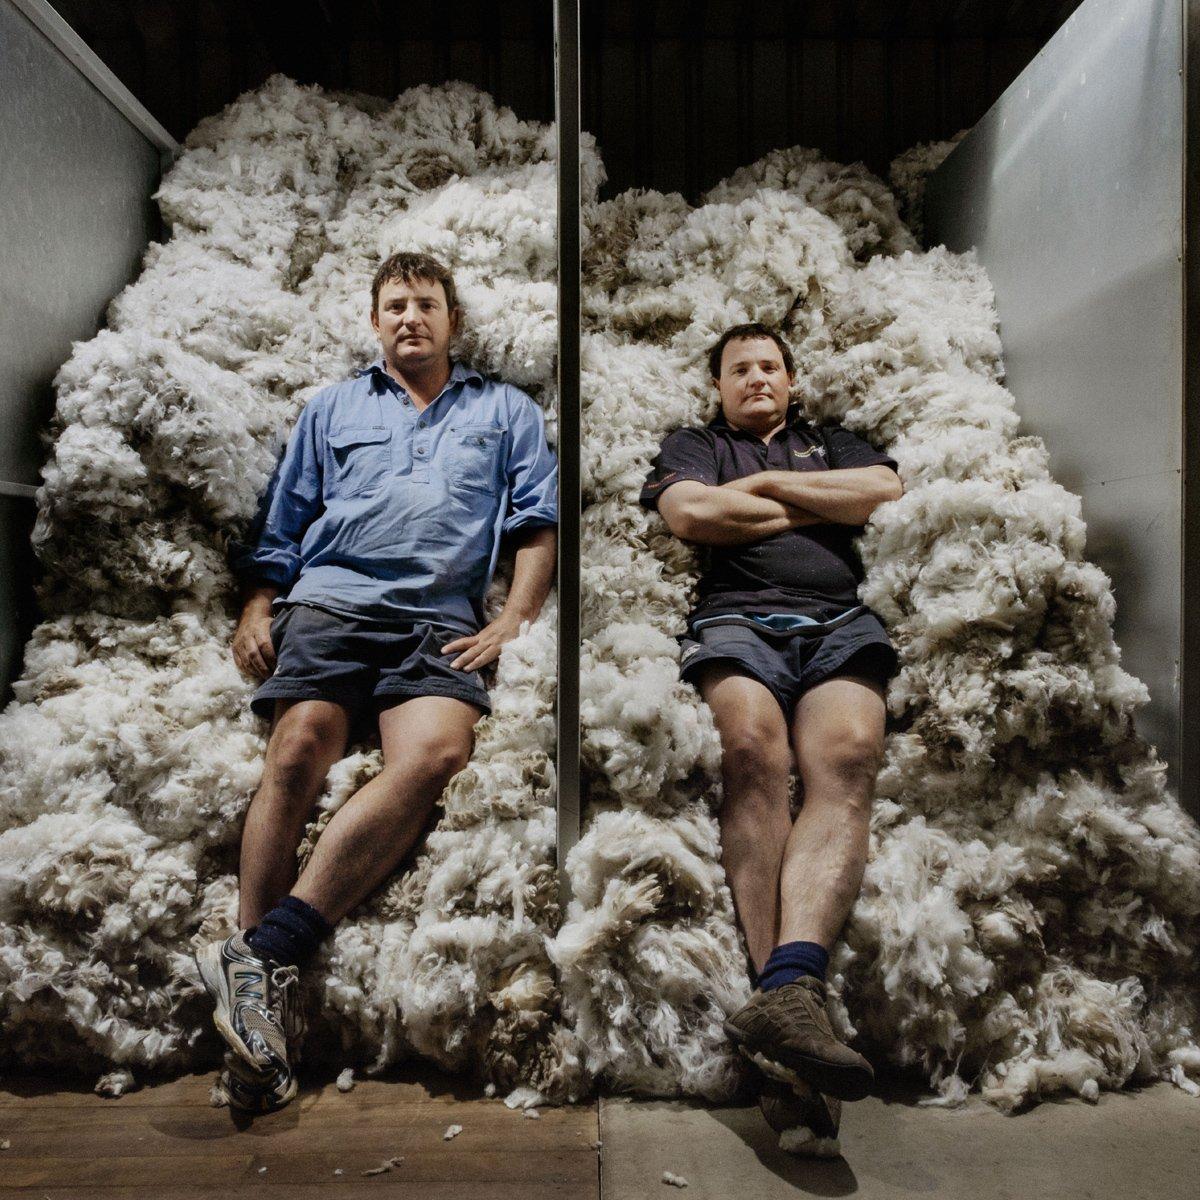 Mill workers laying on sheep wool